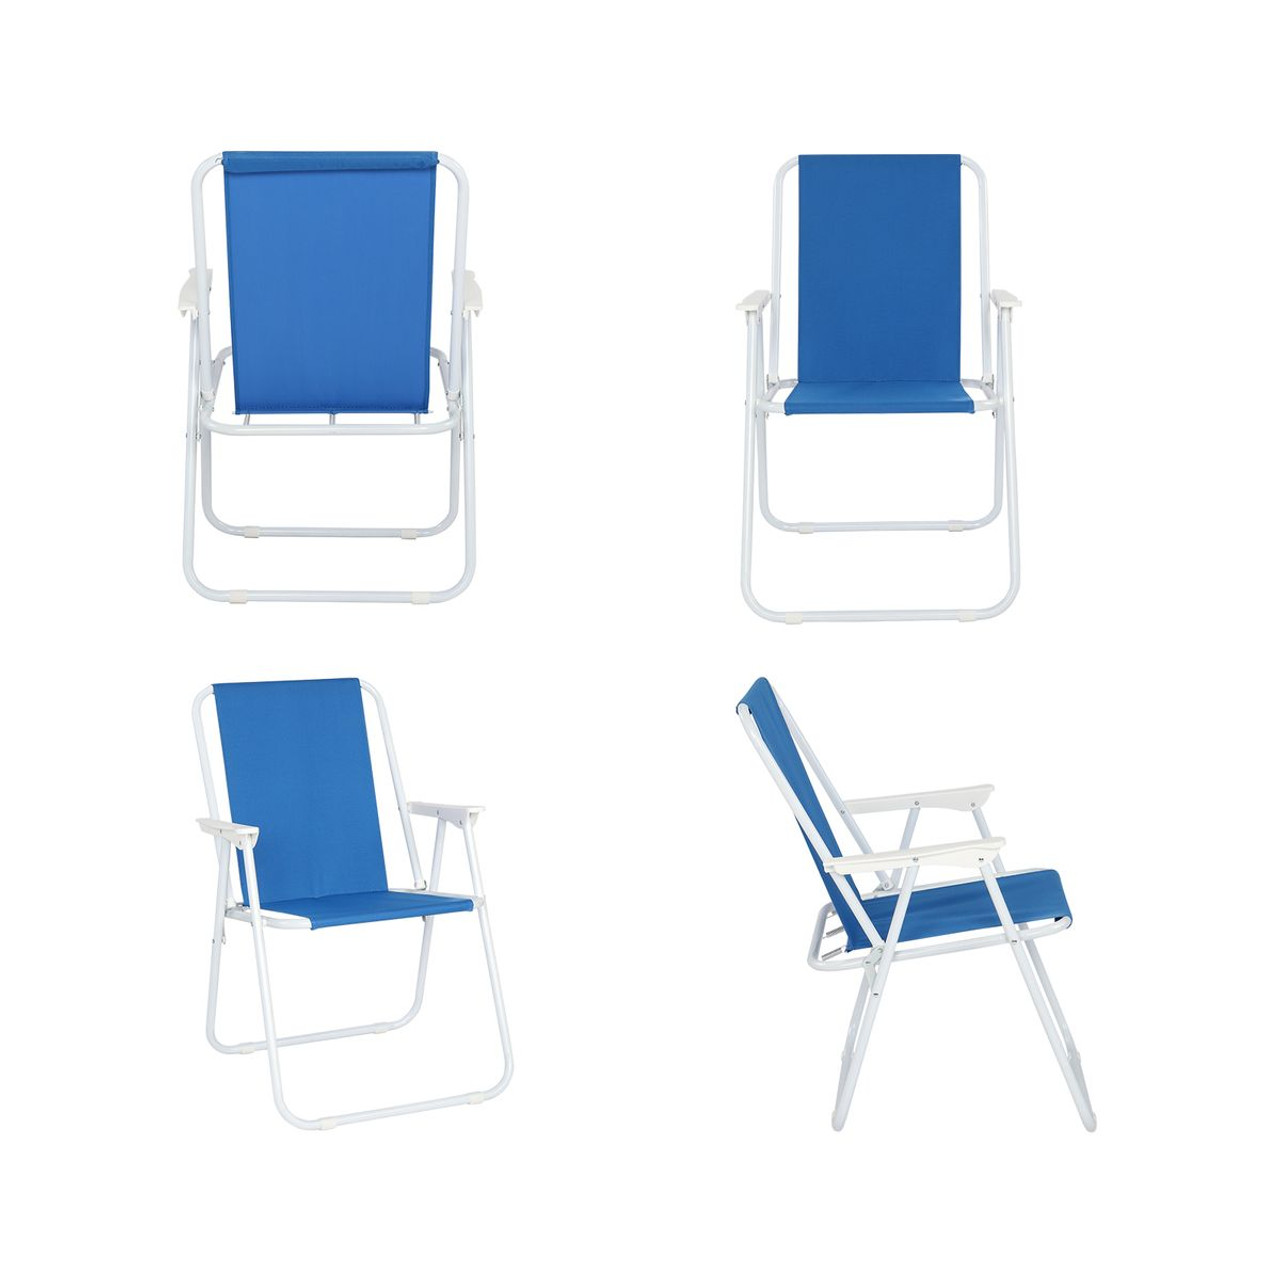 Folding Portable Backpack Beach Chair product image